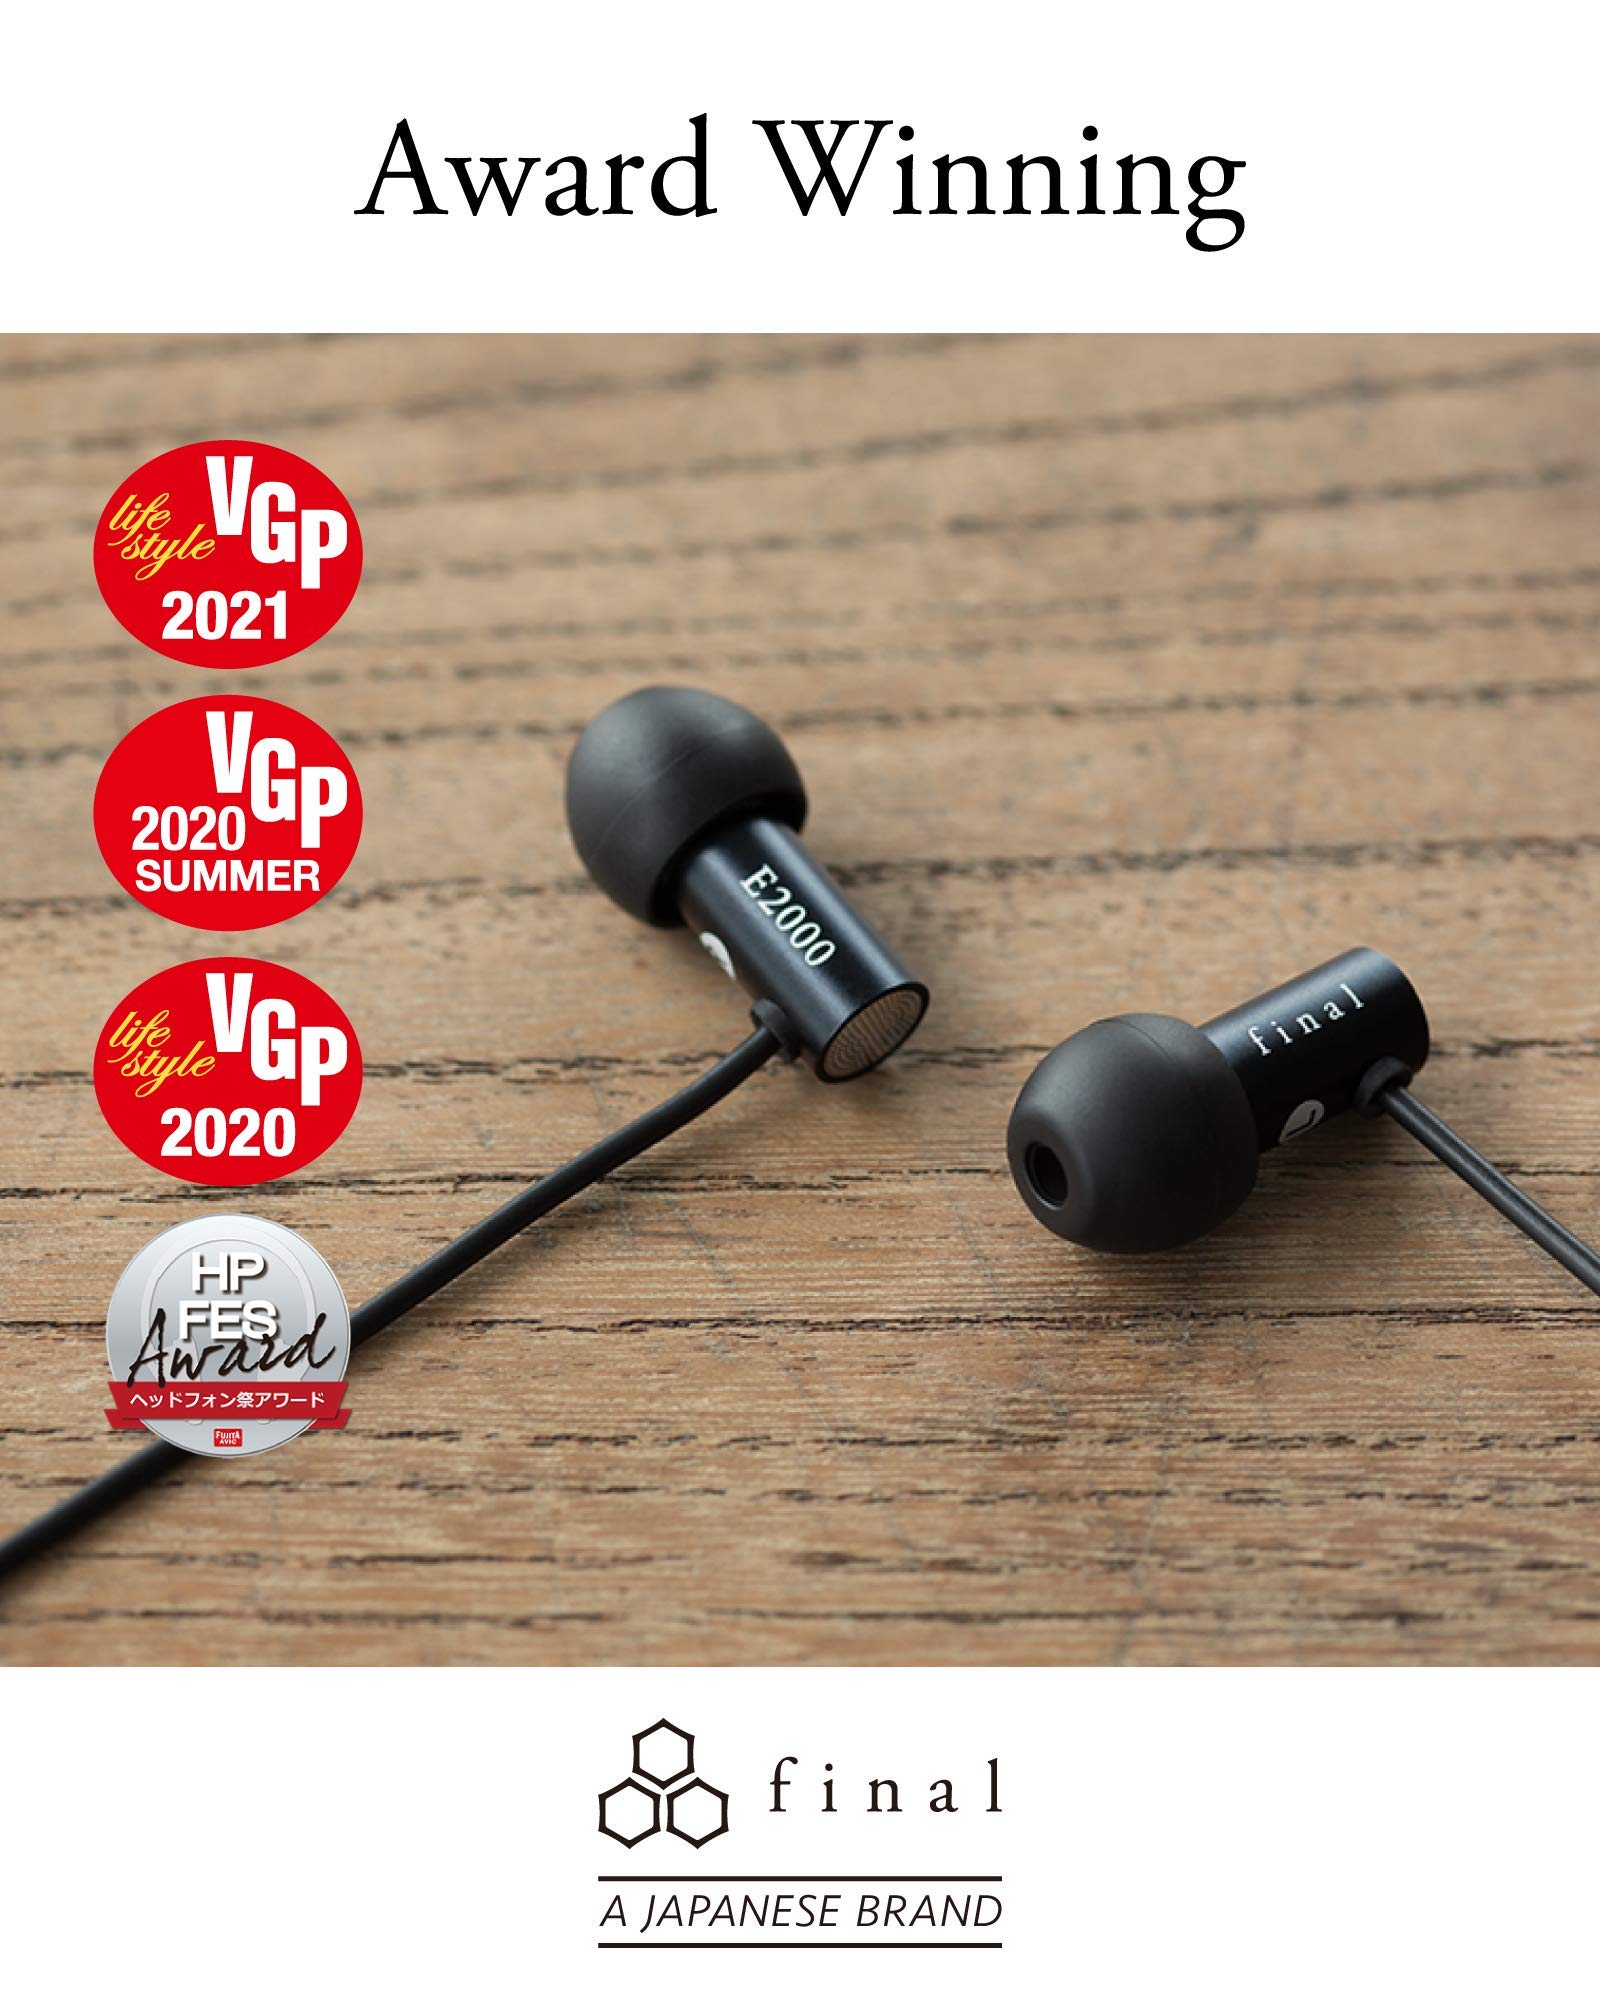 Final E2000C in Ear Isolating Earphones with Smartphone Controls and Microphone - Black Aluminium